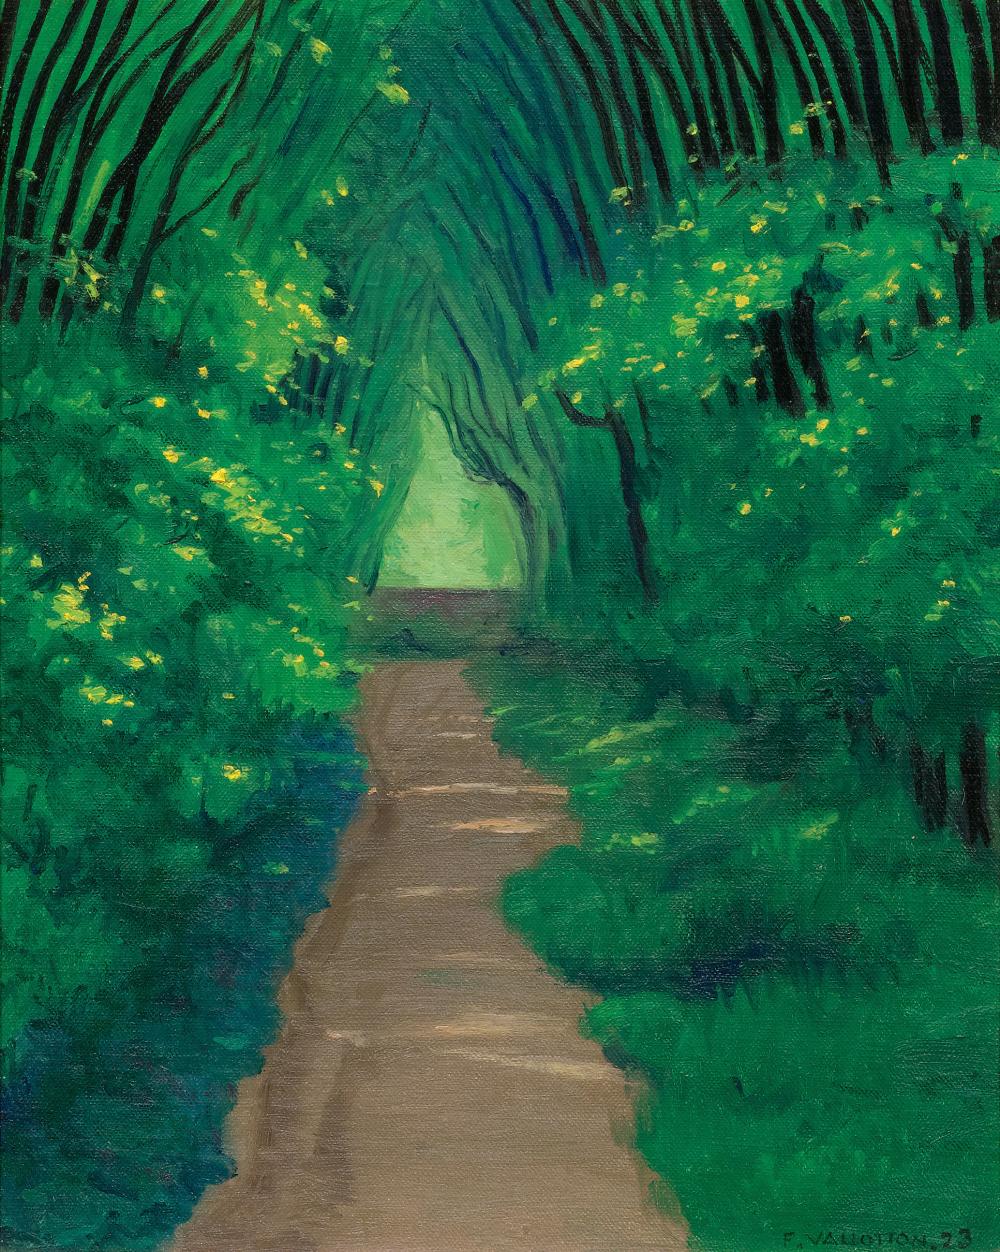 A Covered Walkway in the Grounds of the Rodin Museum by Félix Vallotton - 1923 - 41 x 33 cm private collection